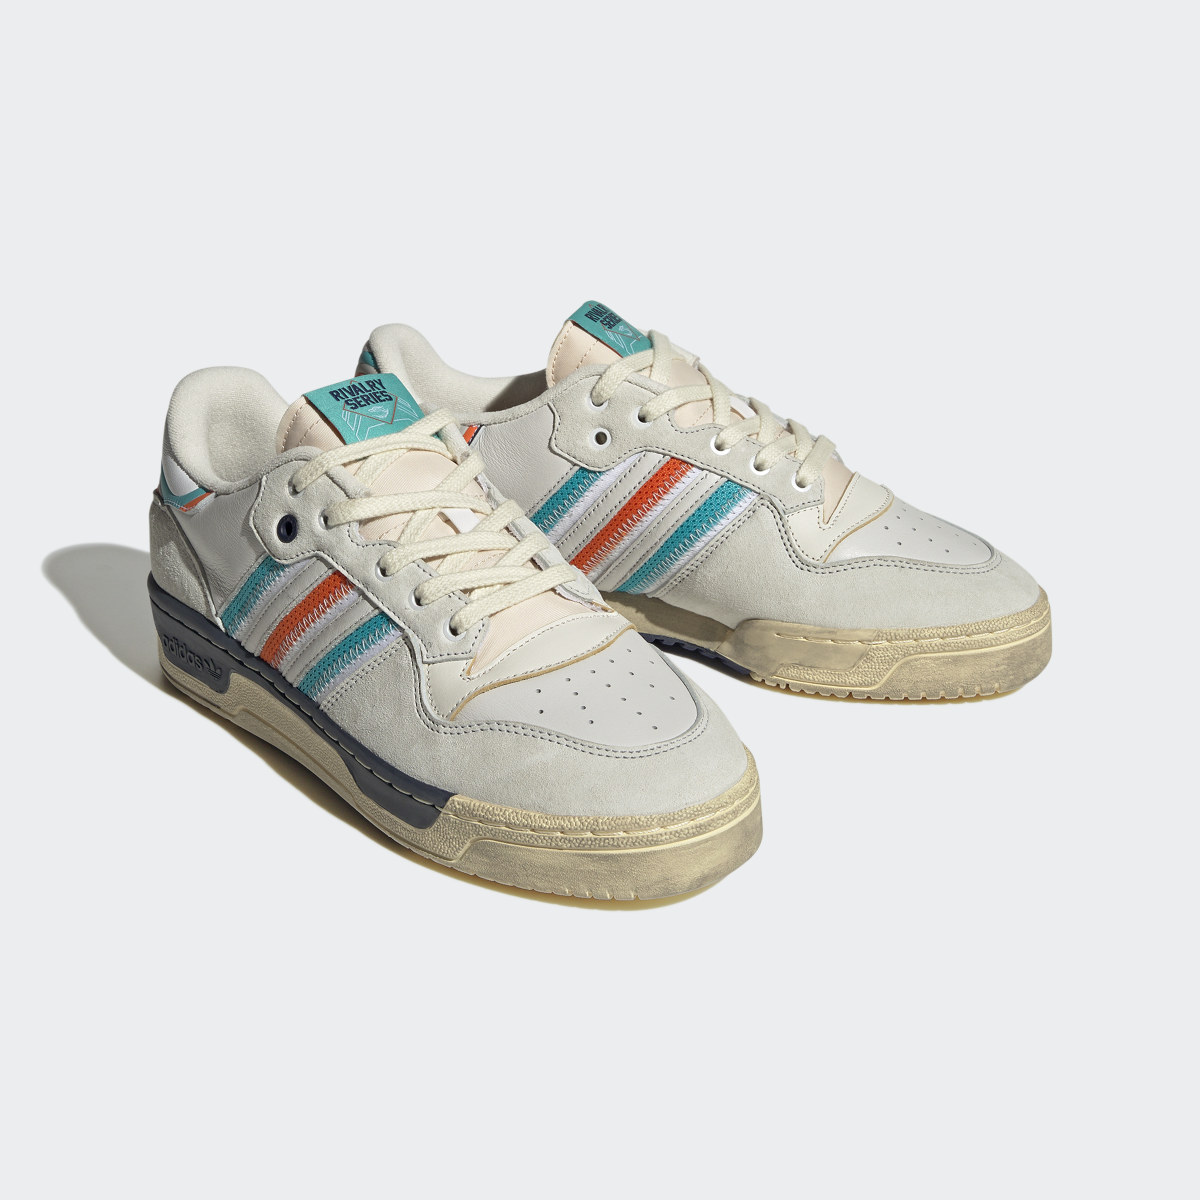 Adidas Rivalry Low Extra Butter Shoes. 6